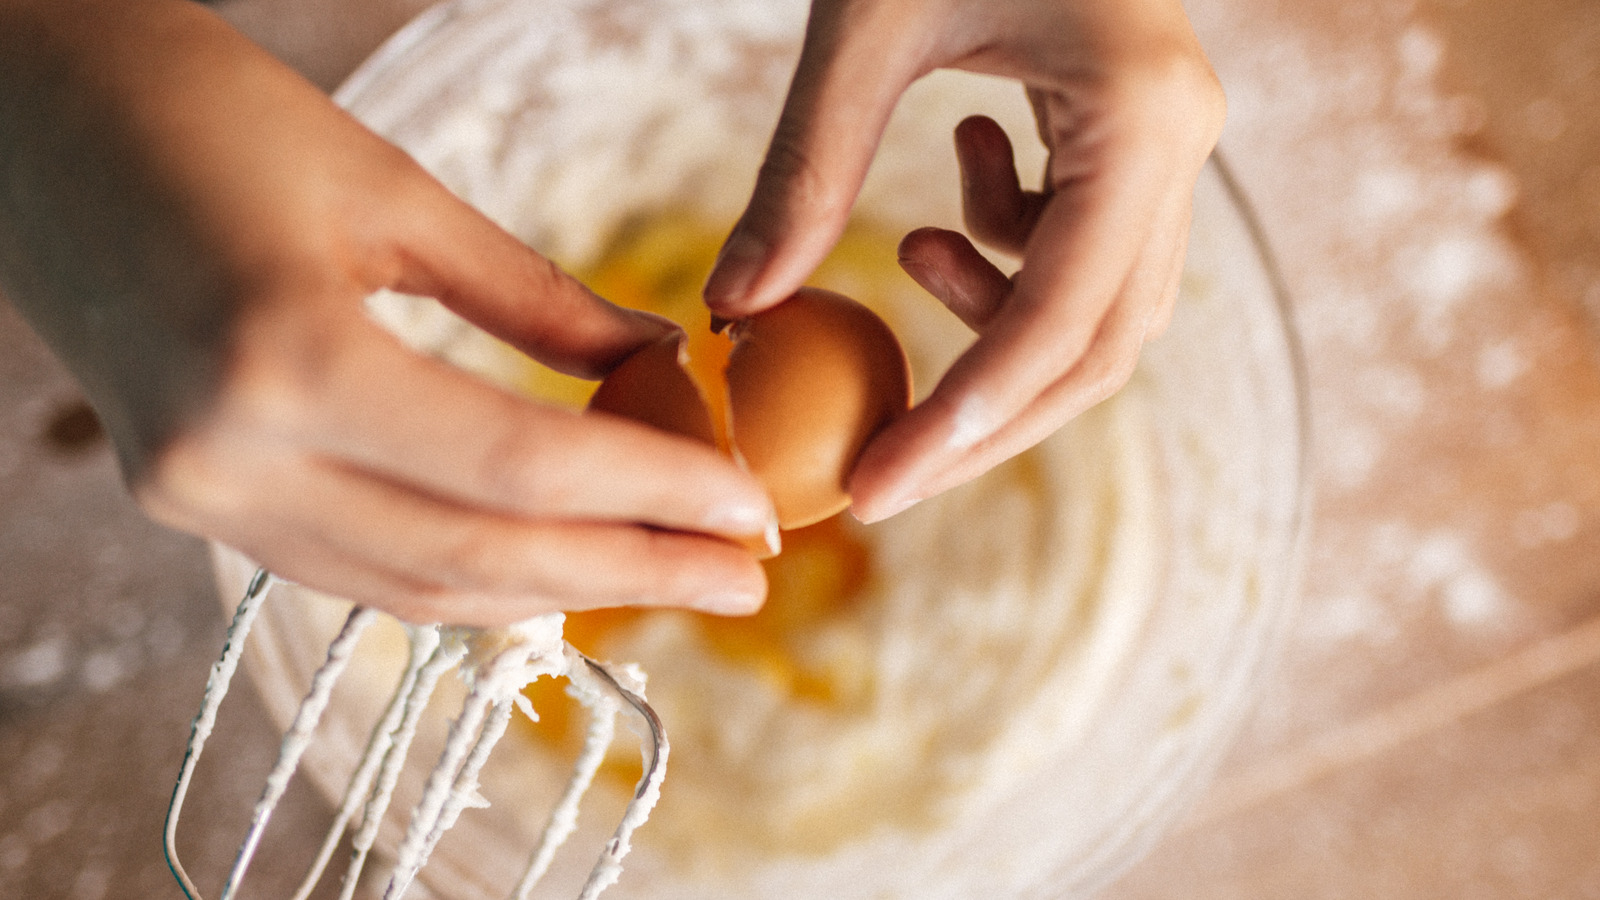 What Size Eggs To Use When Recipes Don't Specify